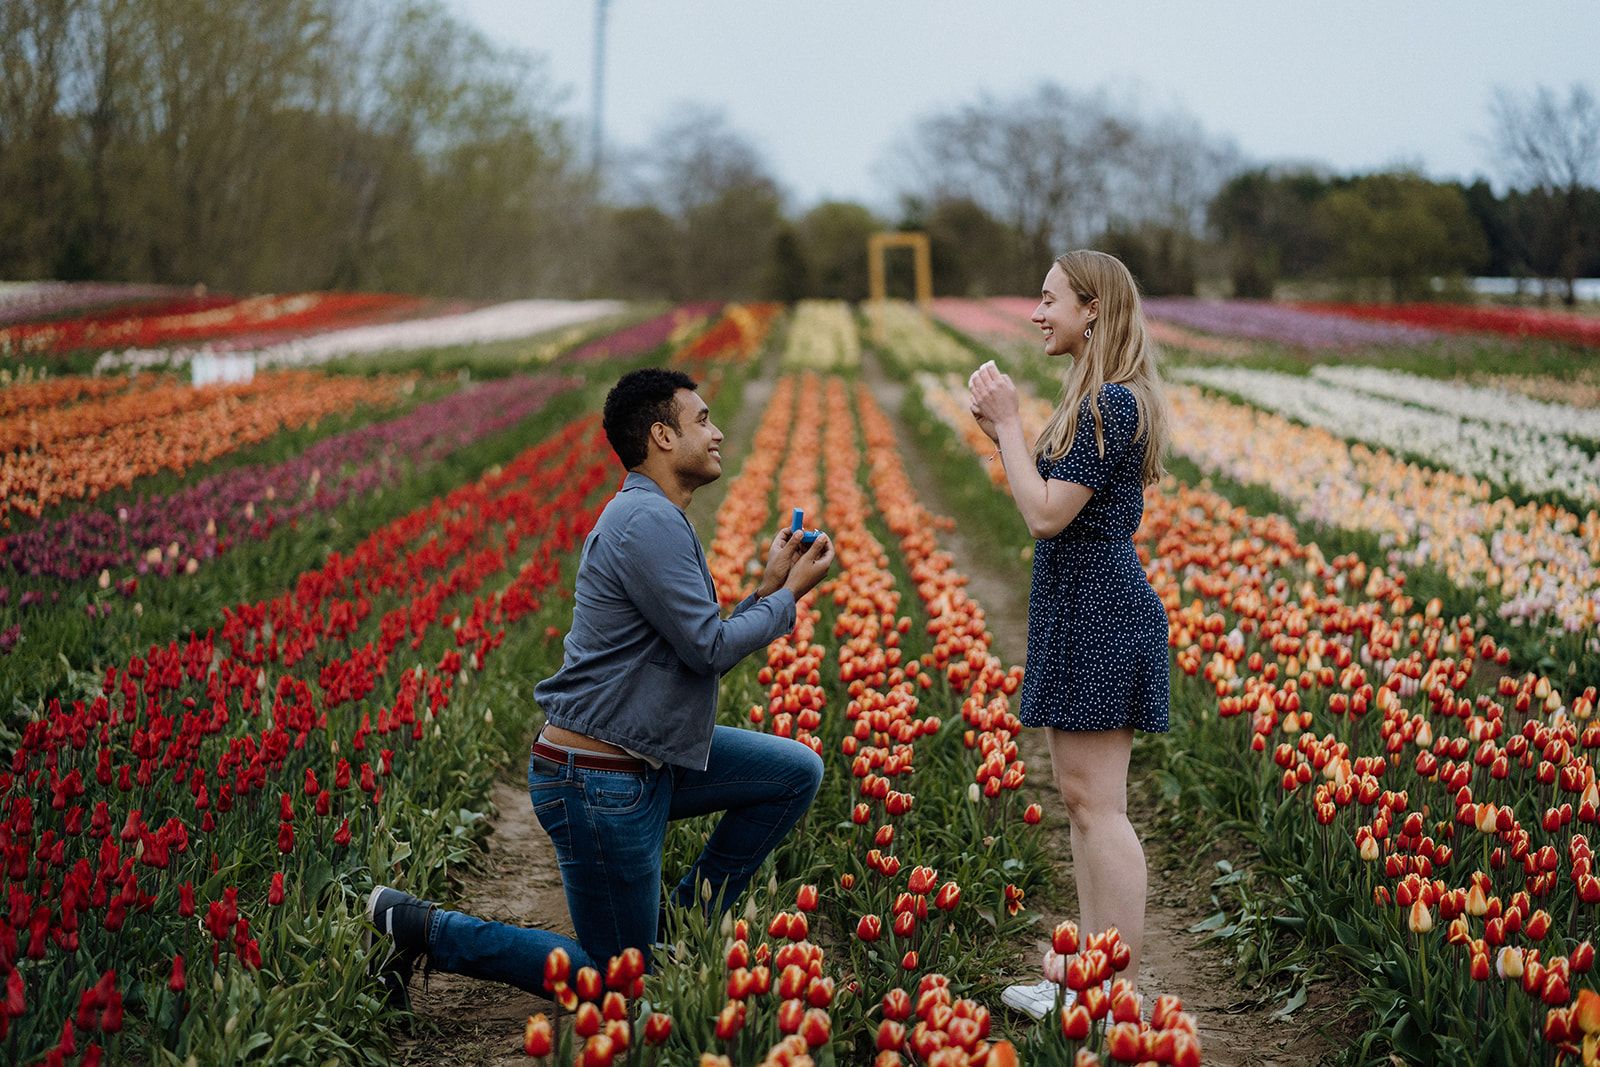 Man kneeling in tulips while his girlfriend looks at him smiling with her arms up.